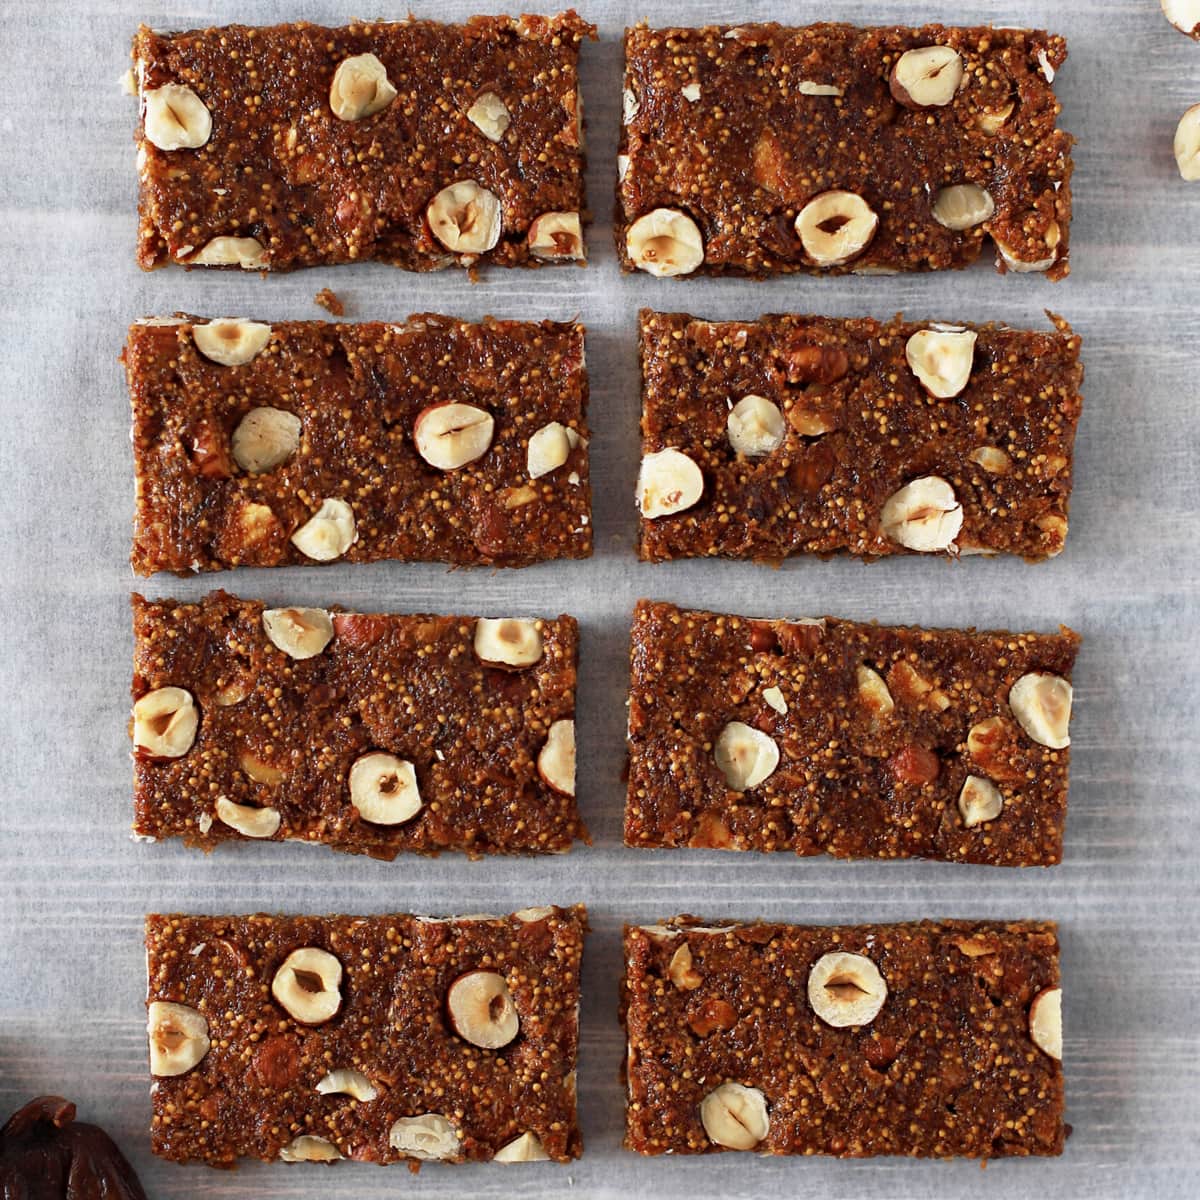 slices of homemade fig bars